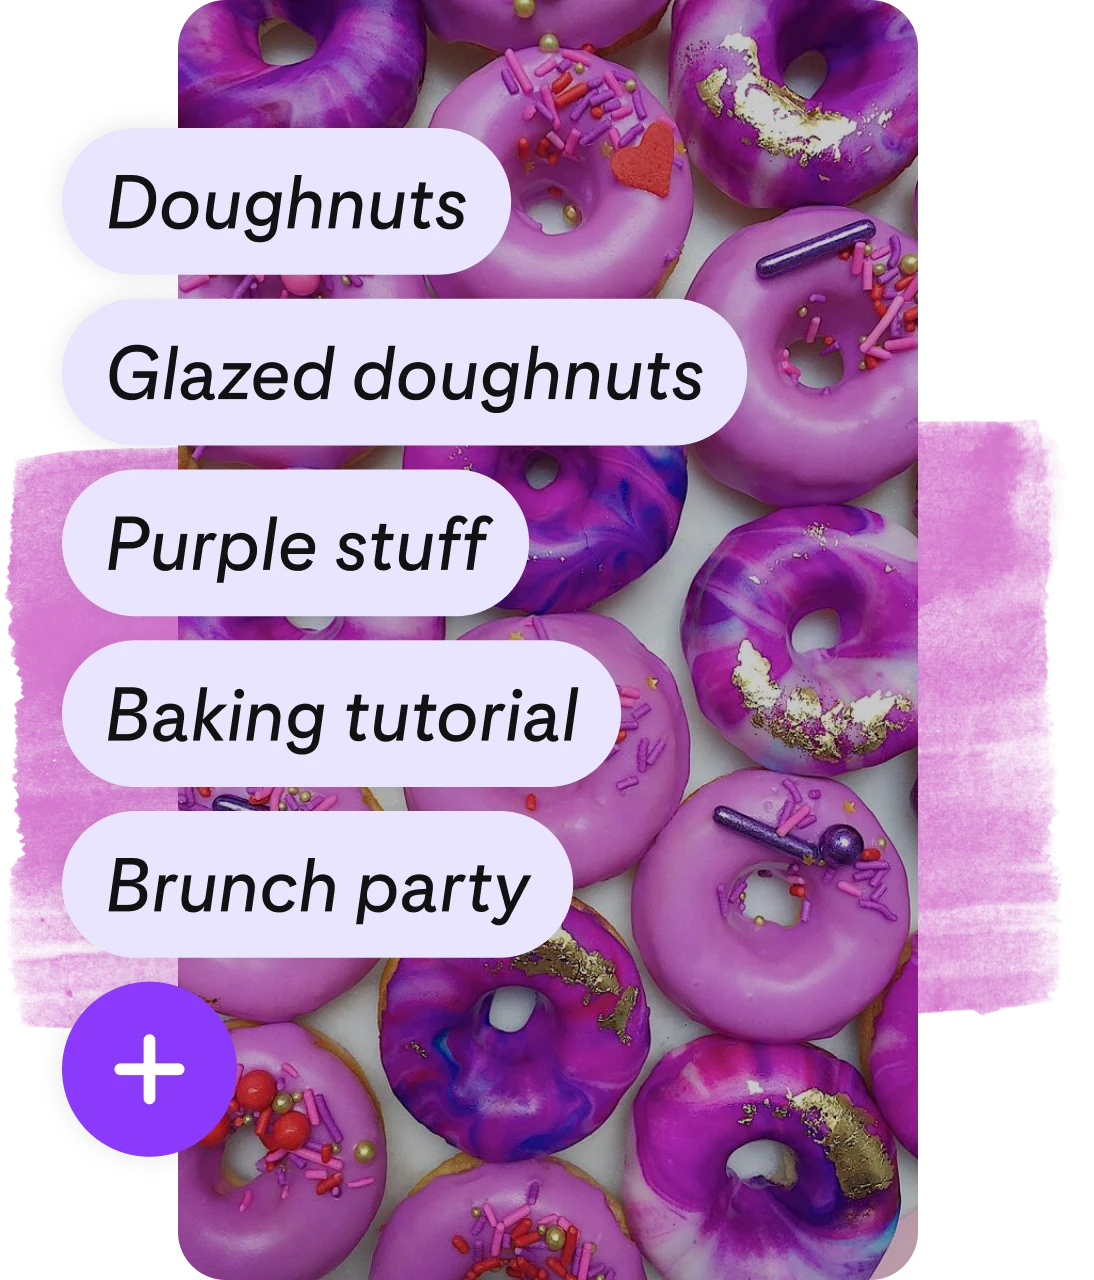 List of tags and a purple ‘add’ button overlaid on a Pin of purple doughnuts